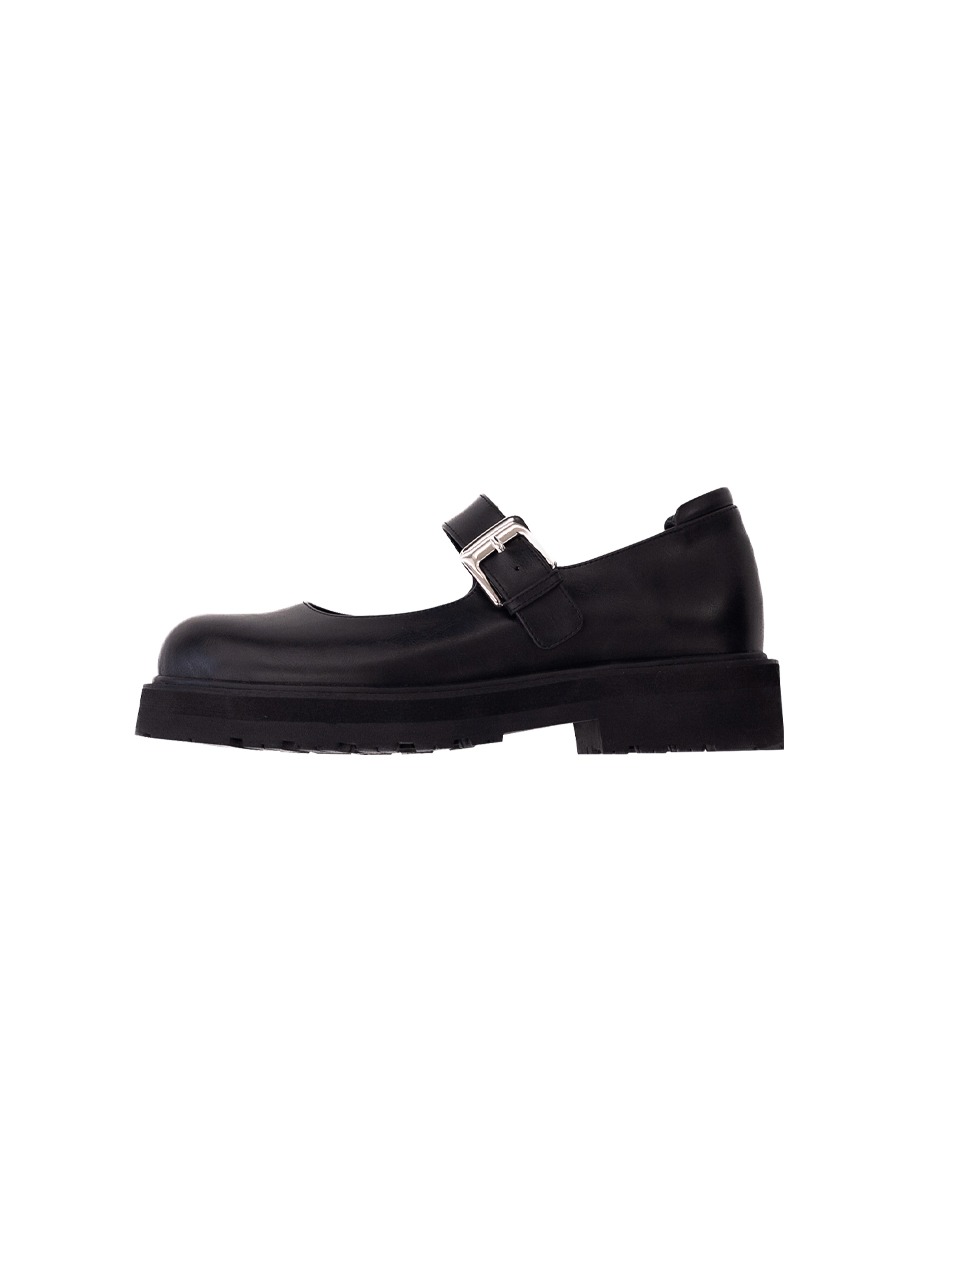 LECYTO - STRAP MARY JANE SHOES (BLACK)